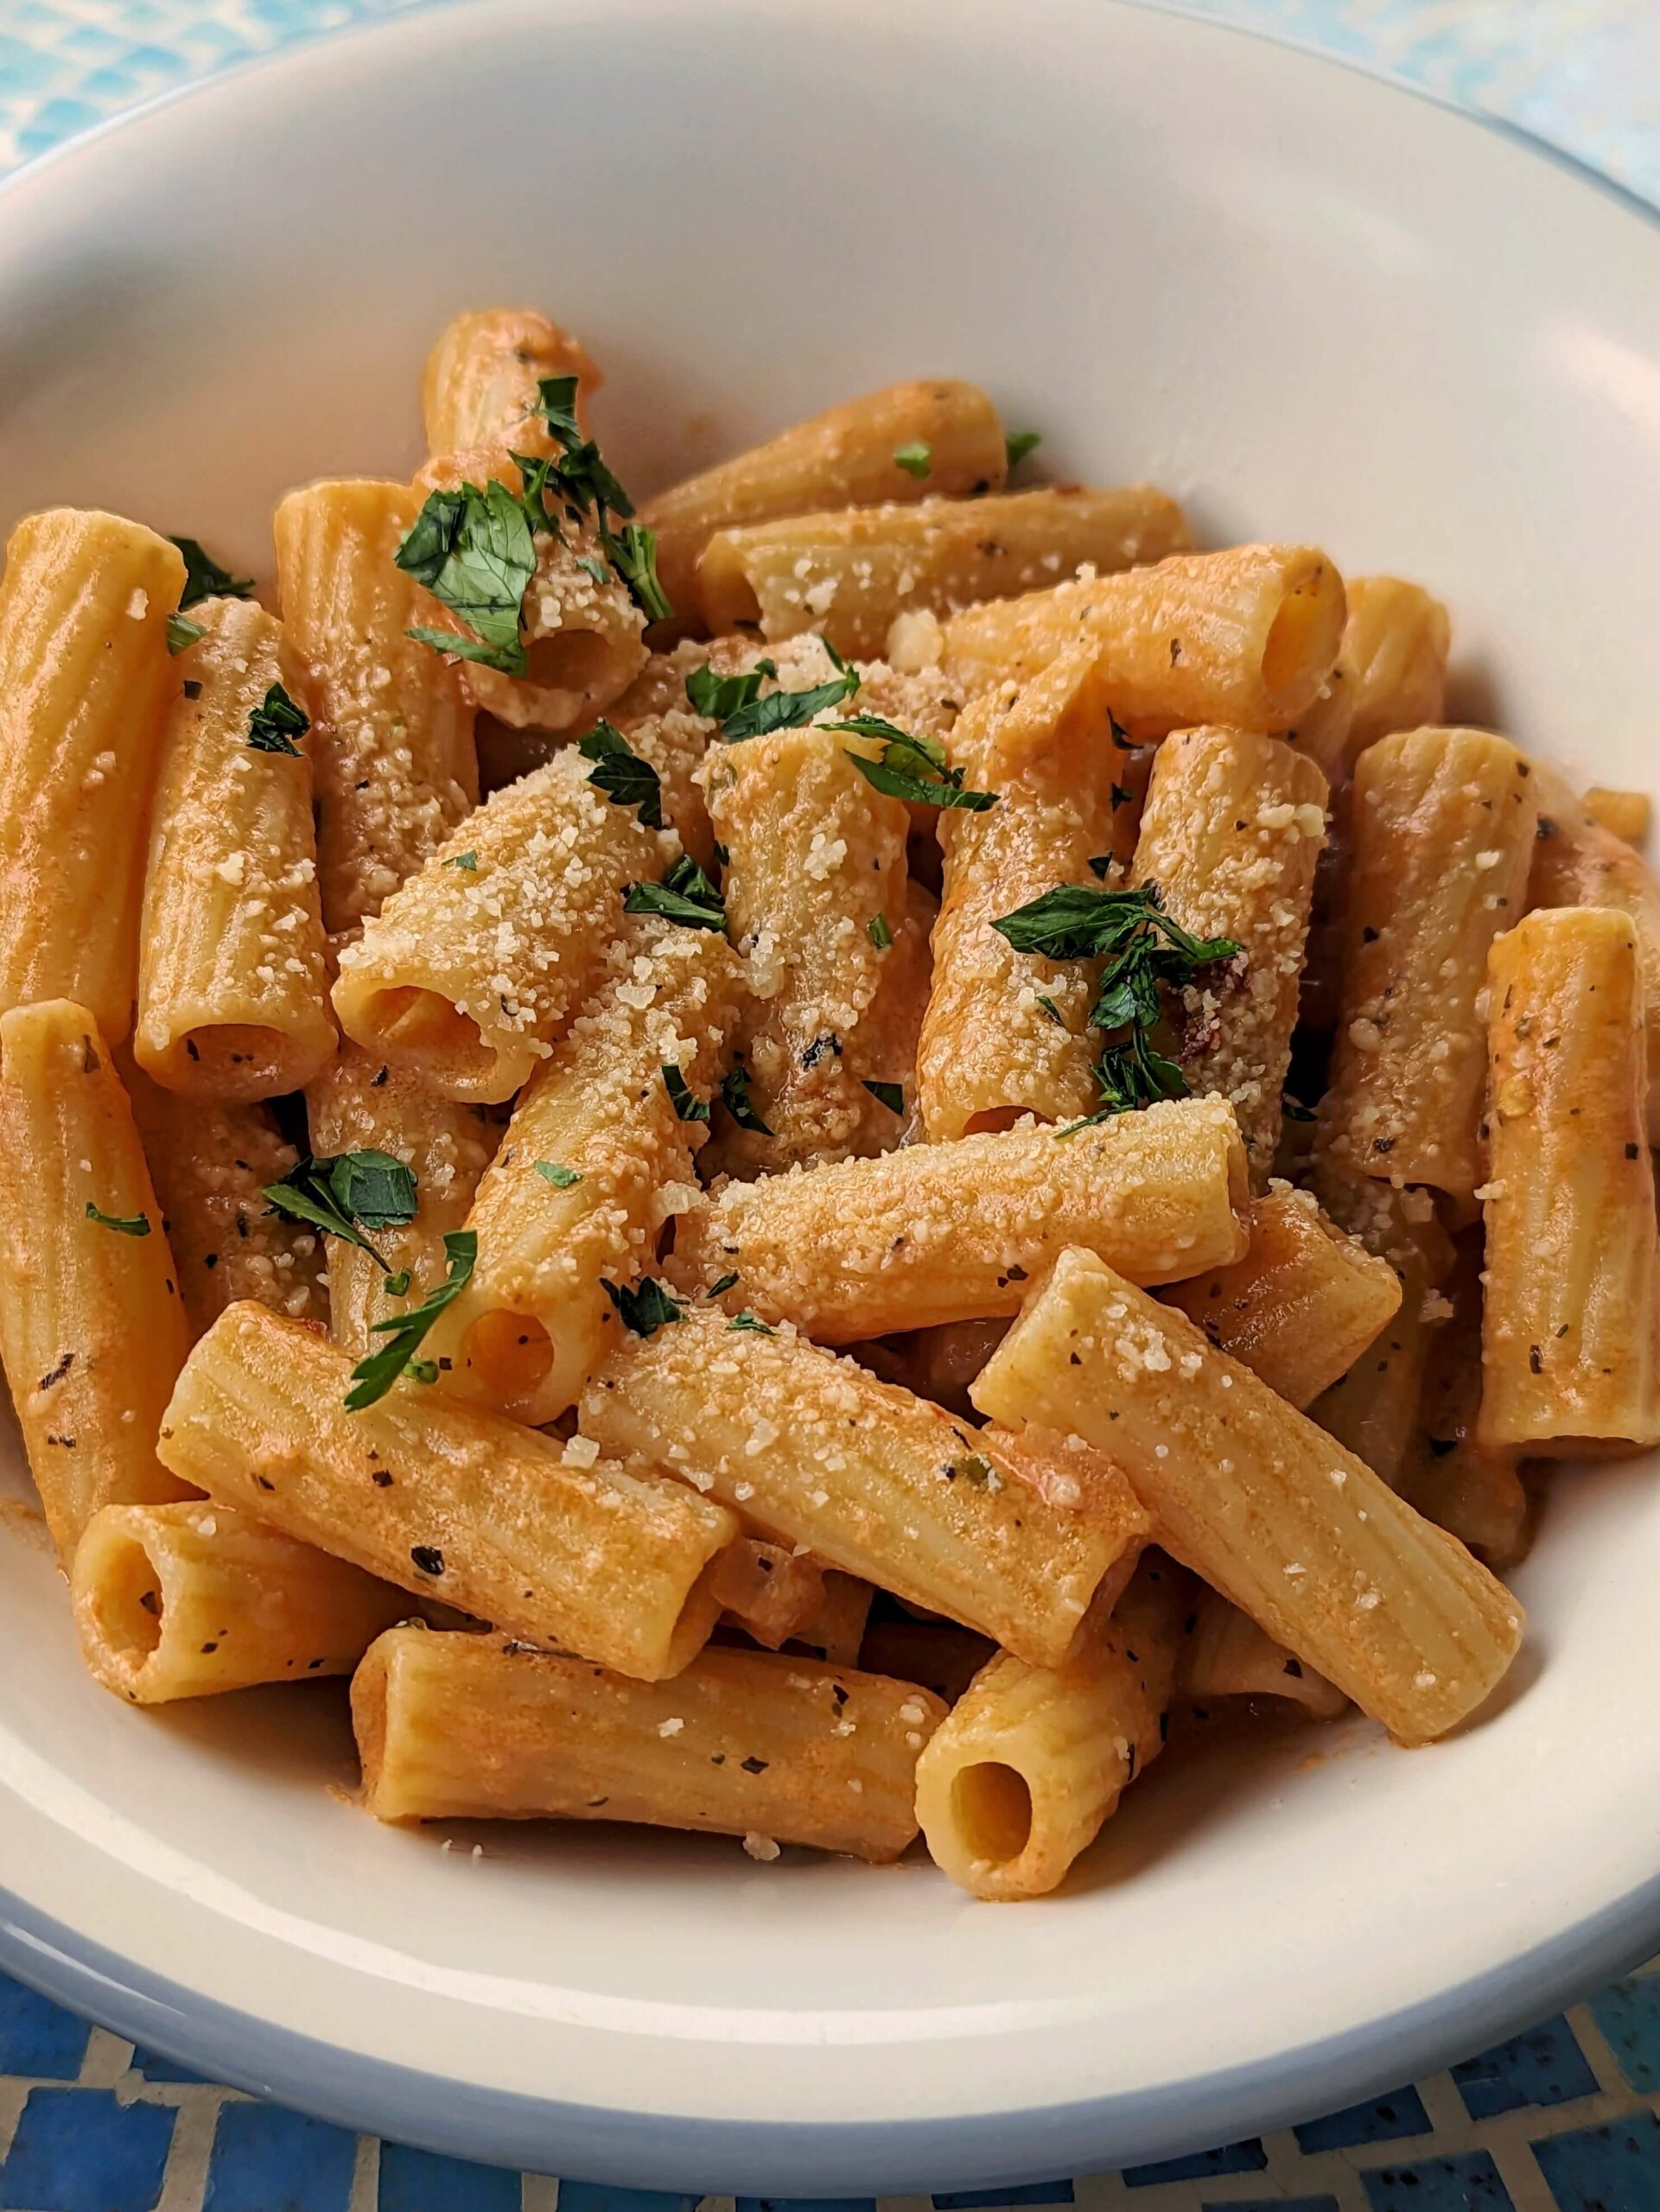 Gigi hadid pasta recipe in a serving bowl topped with parsley.